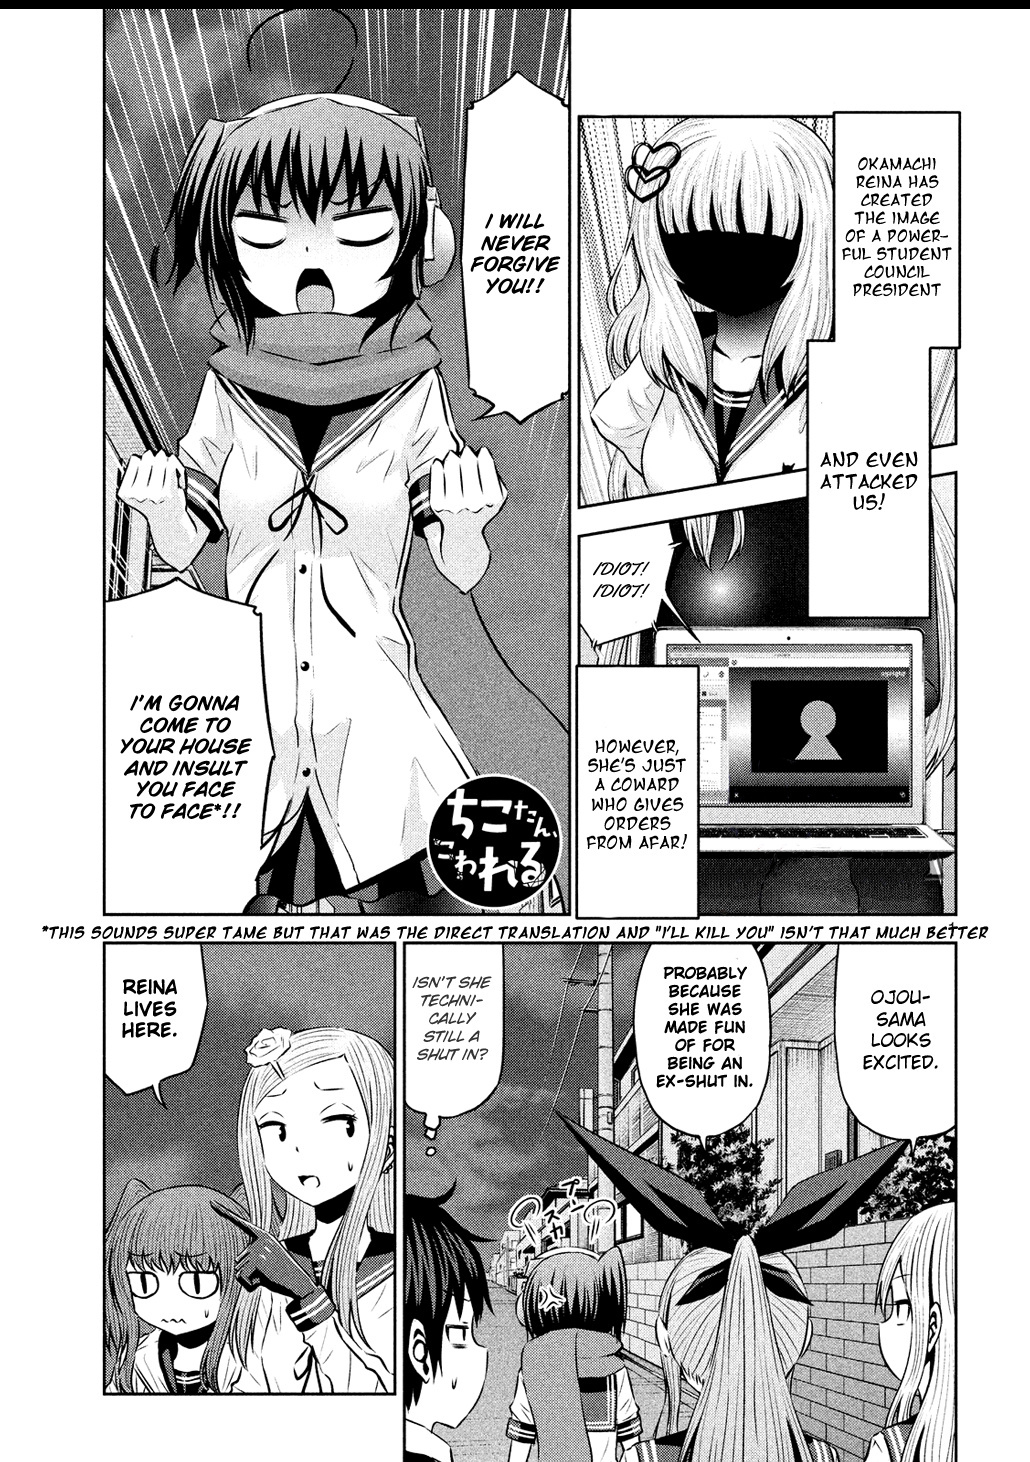 Chikotan, Kowareru Vol.6 Chapter 59: Chiko Corners The Student Council President!! What Is Her True Identity?! - Picture 1